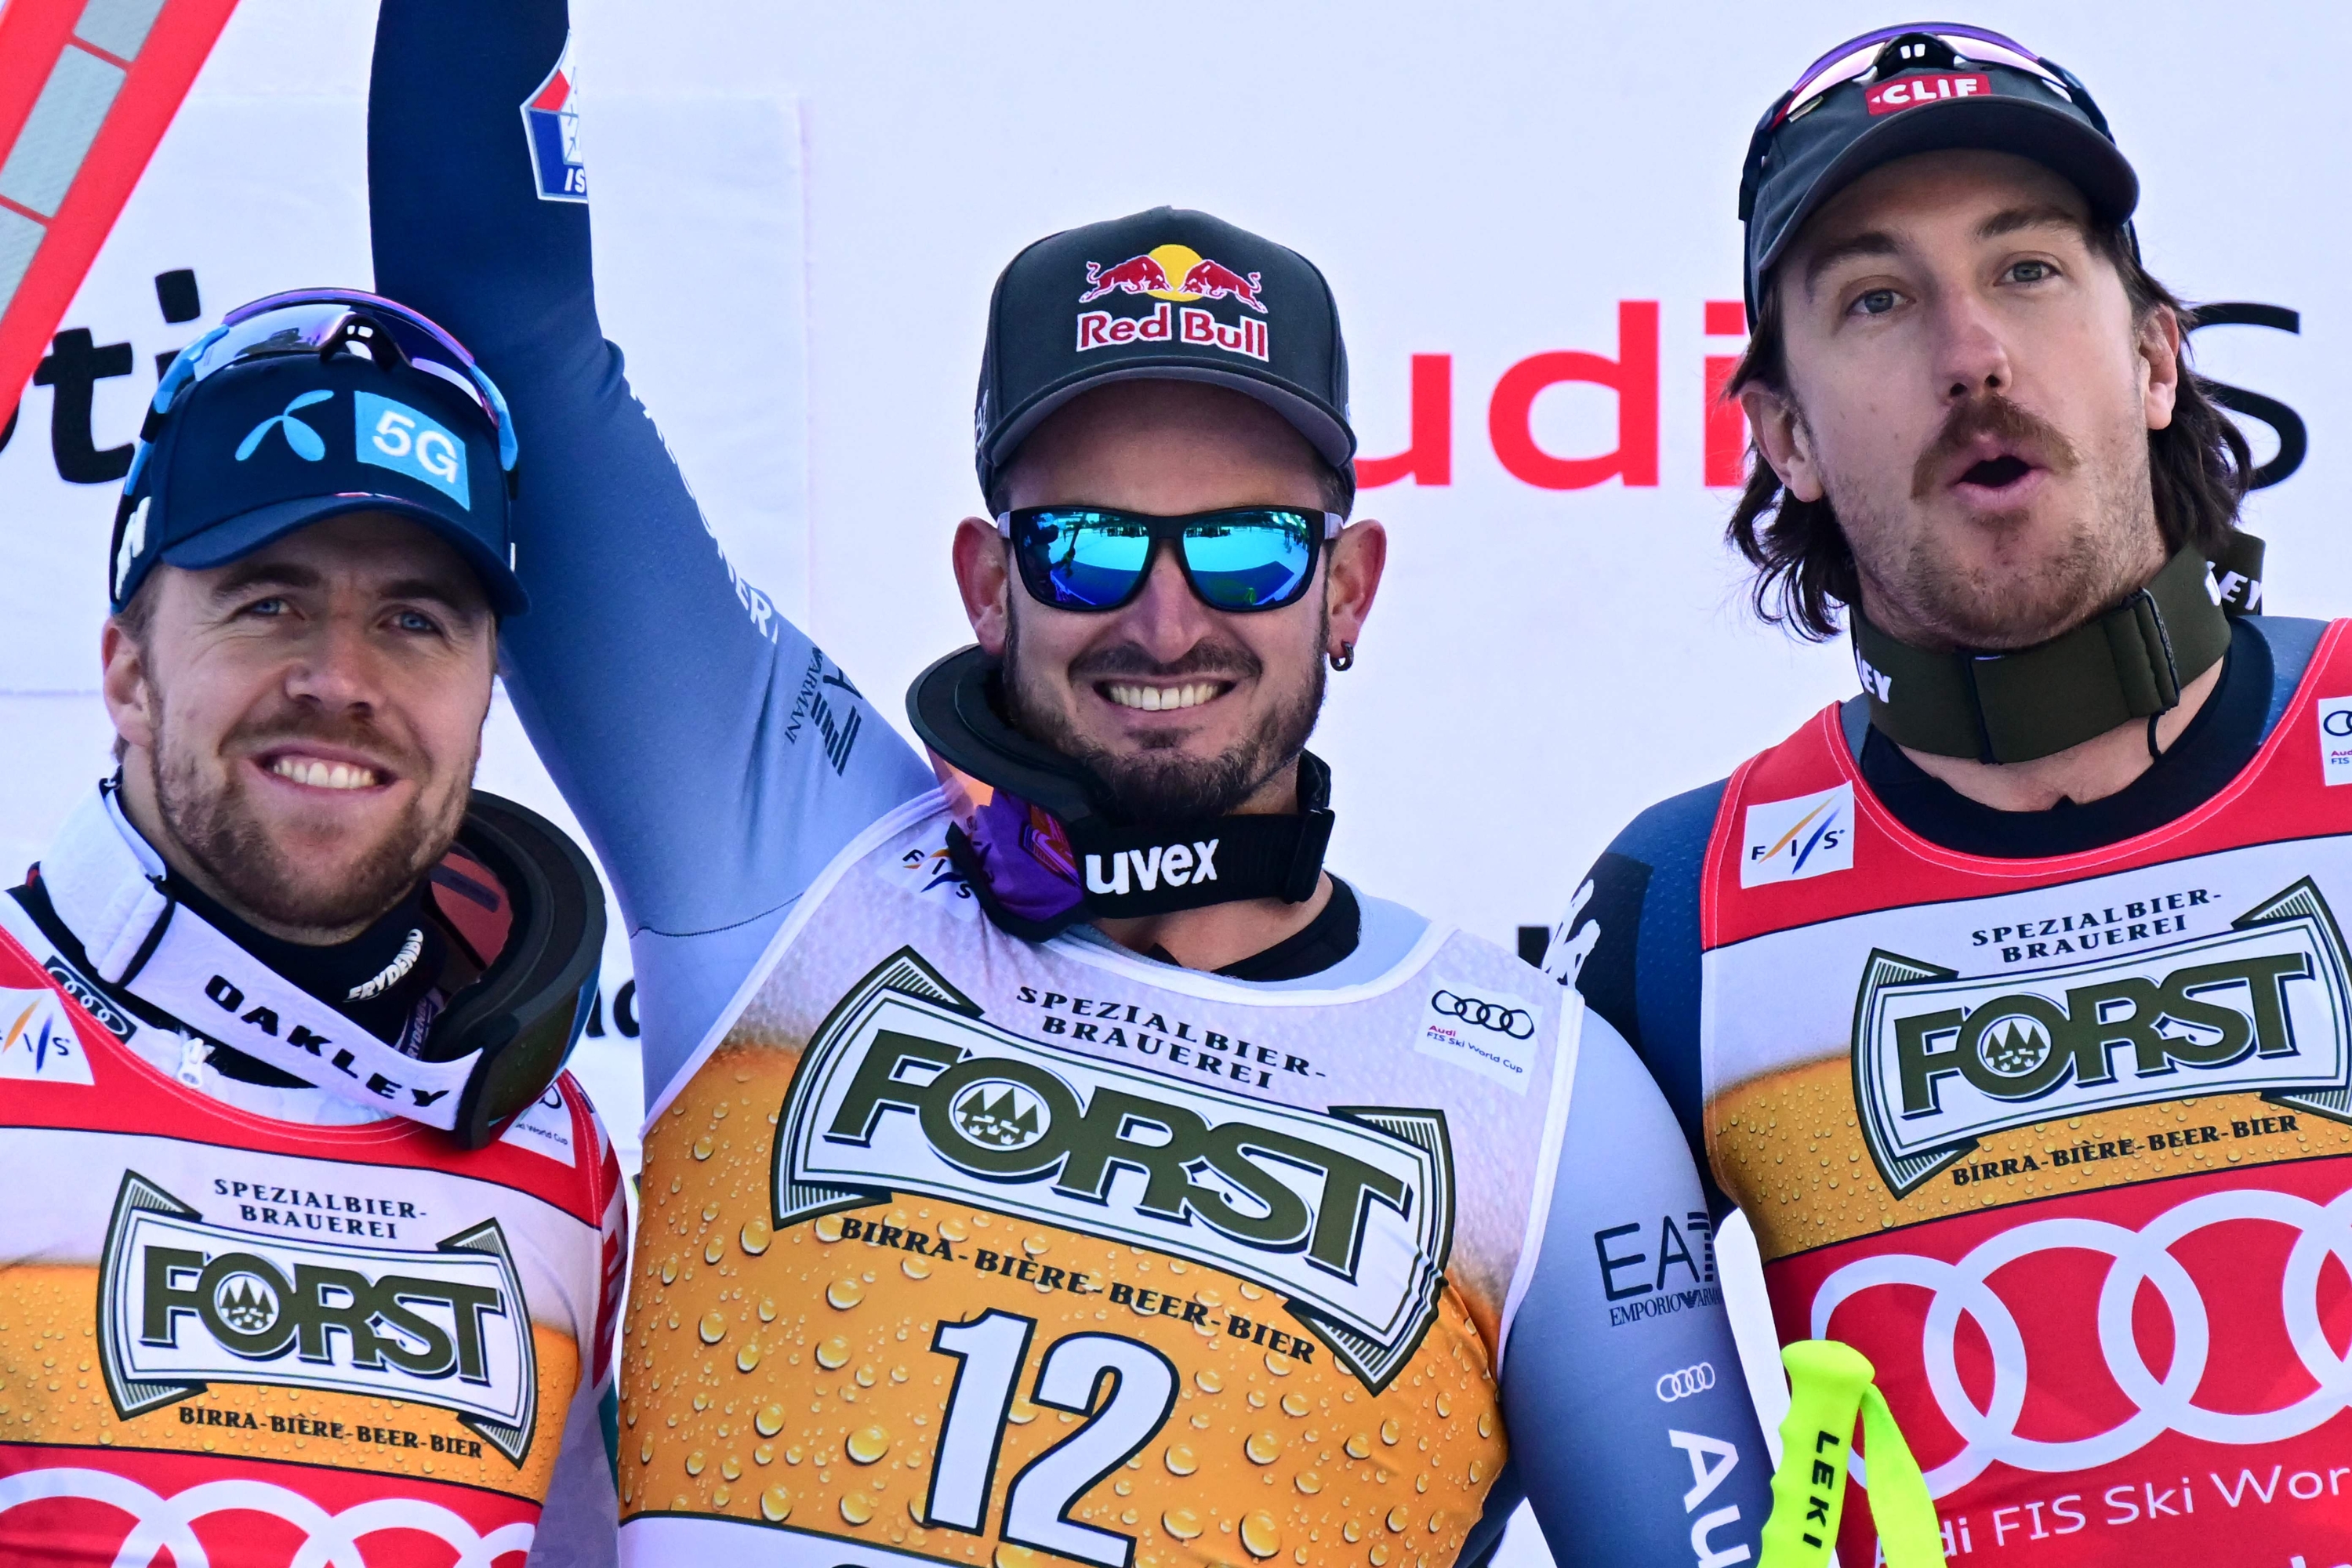 First placed Italian Dominik Paris (C), second placed Norwegian Aleksander Aamodt Kilde (L) and third placed US' Bryce Bennett pose on the podium after winning the men's Downhill during the FIS Alpine Ski World Cup in Val Gardena on December 16, 2023. (Photo by Tiziana FABI / AFP)